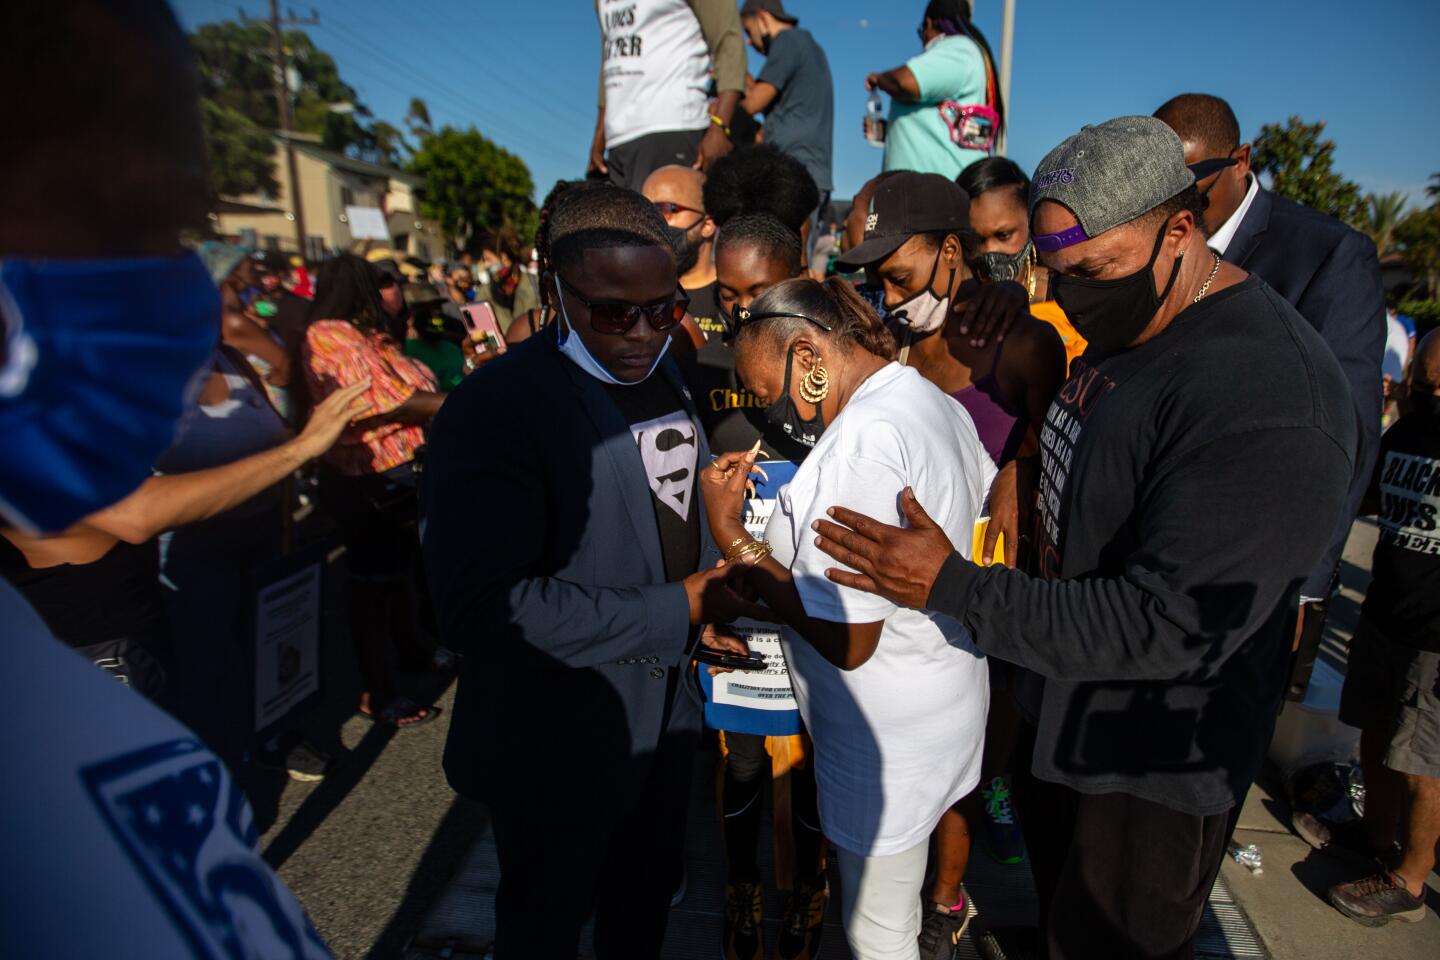 The family of Dijon Kizzee gathers Saturday with protesters in front of the South Los Angeles sheriff's station